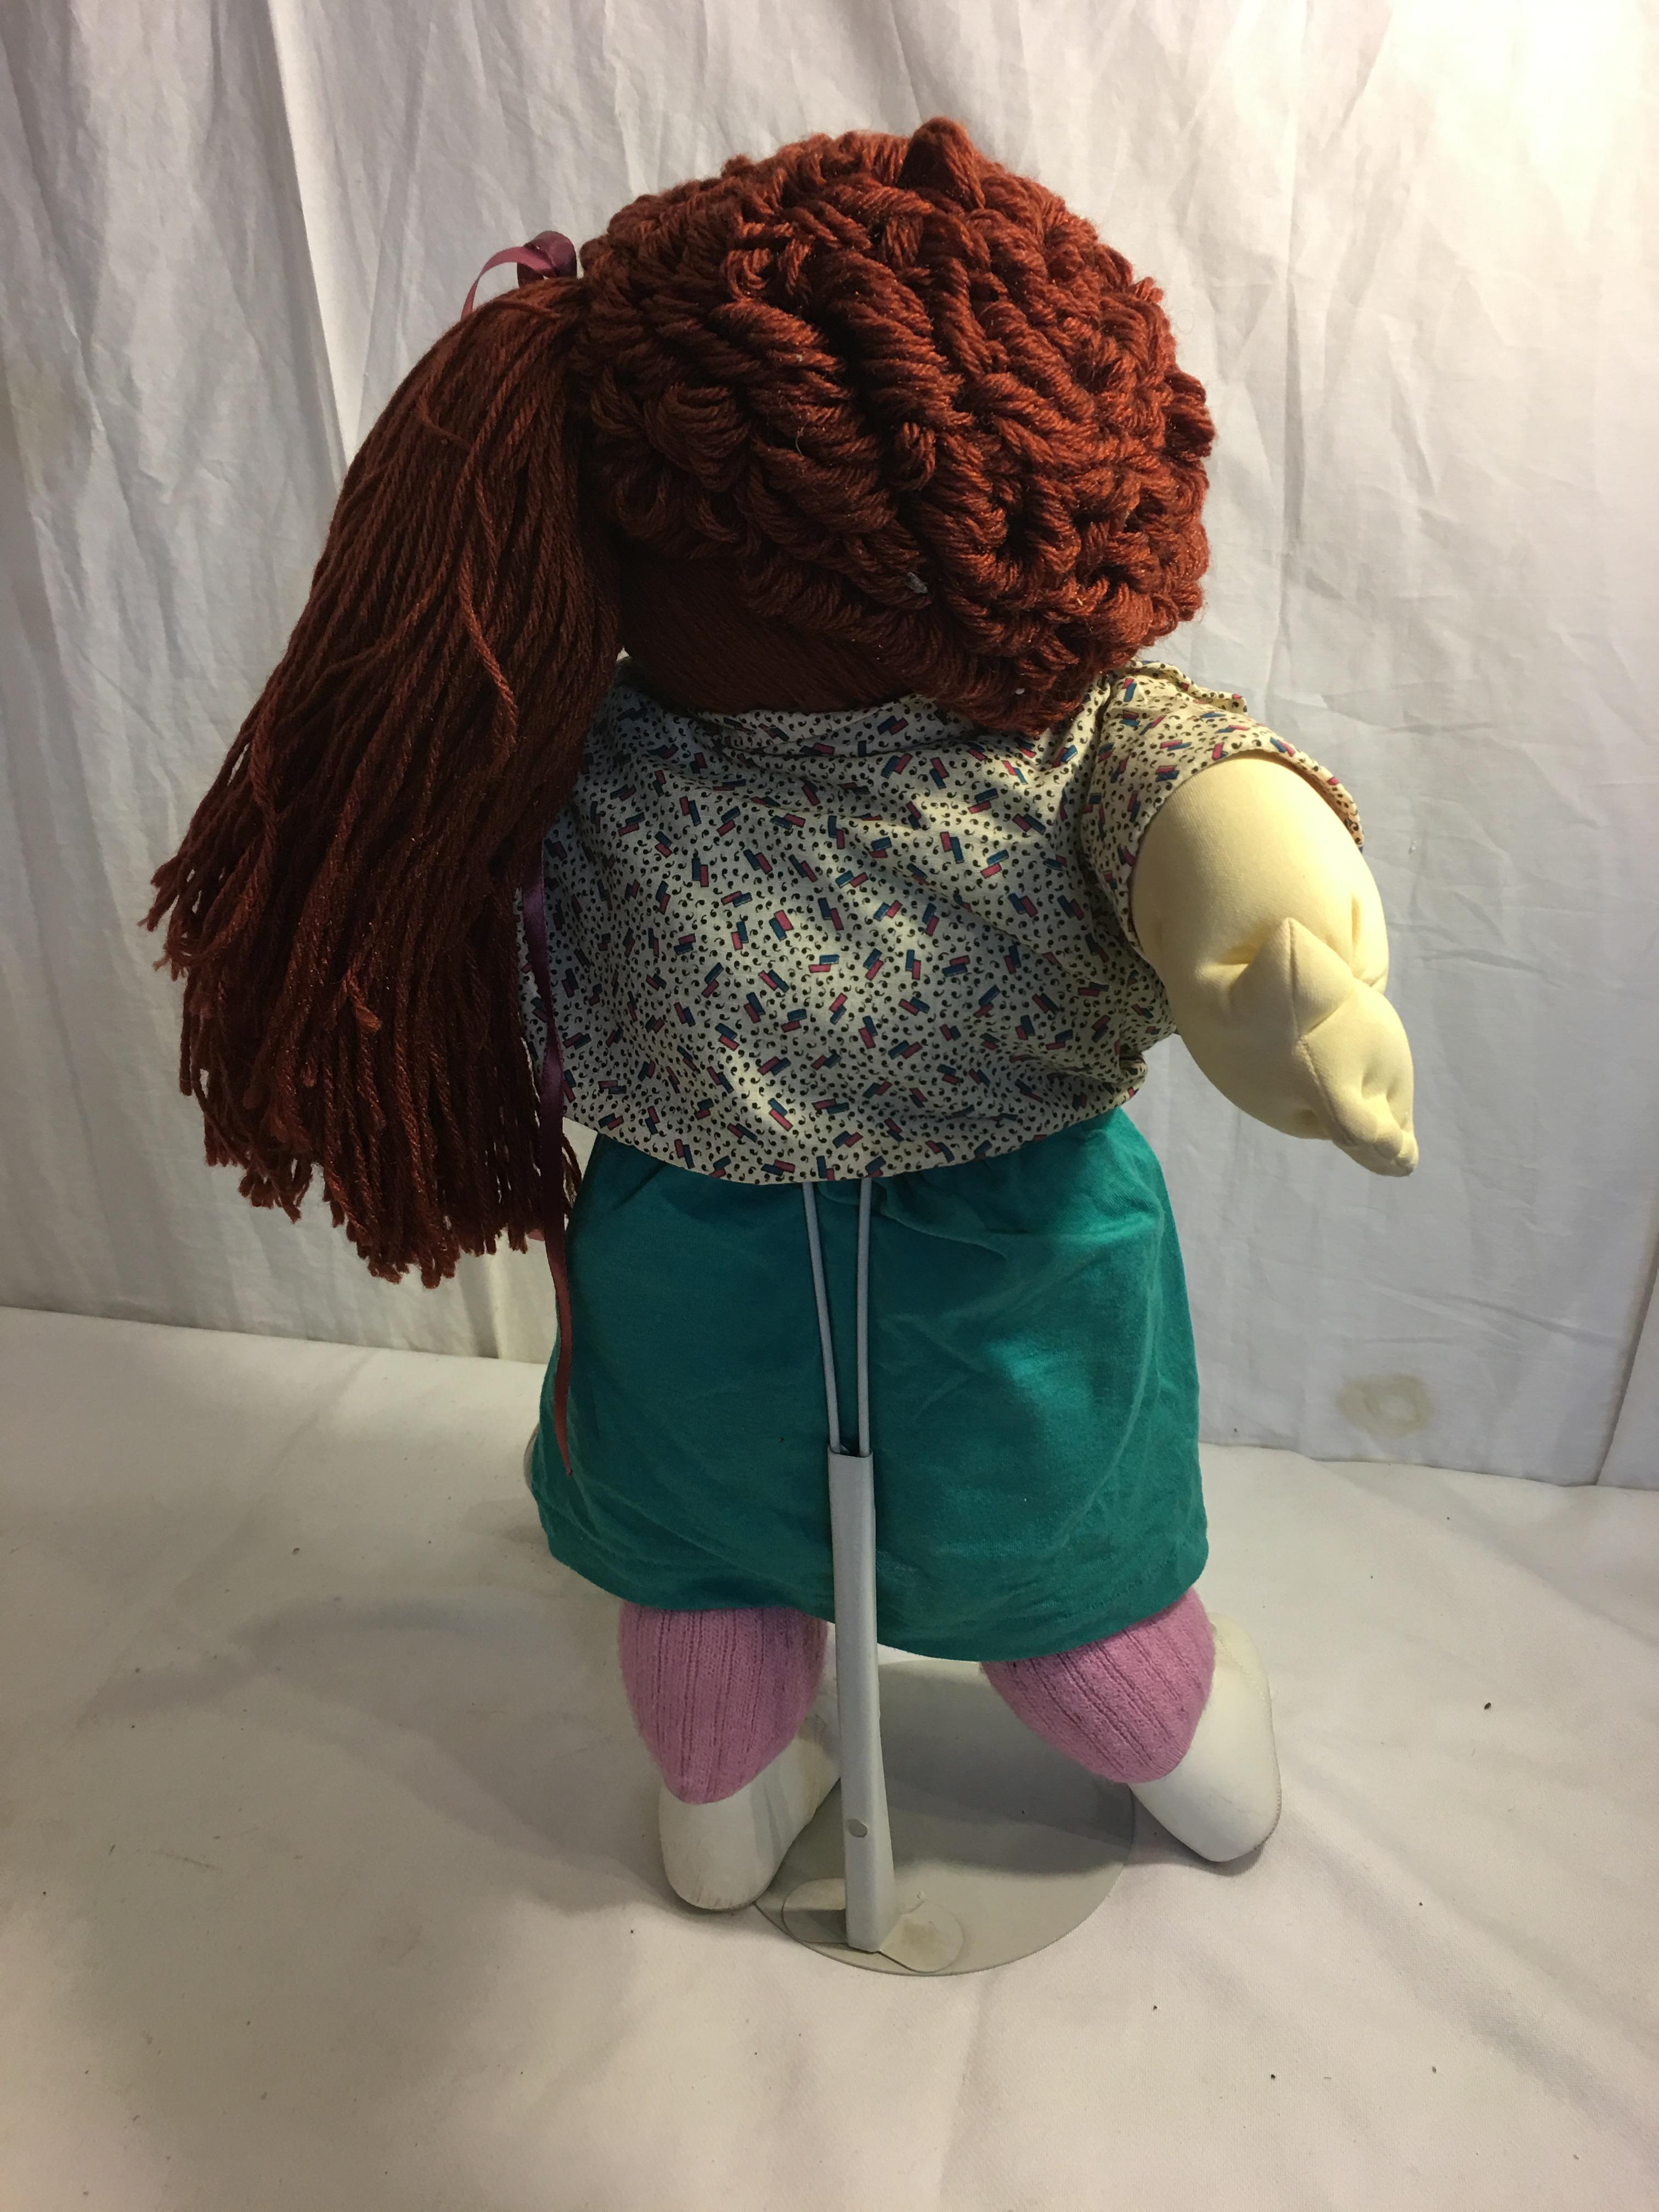 Collector Loose Vintage 1988 Original Cabbage Patch Kids Doll "Imogene Sarann" Size:23"tall